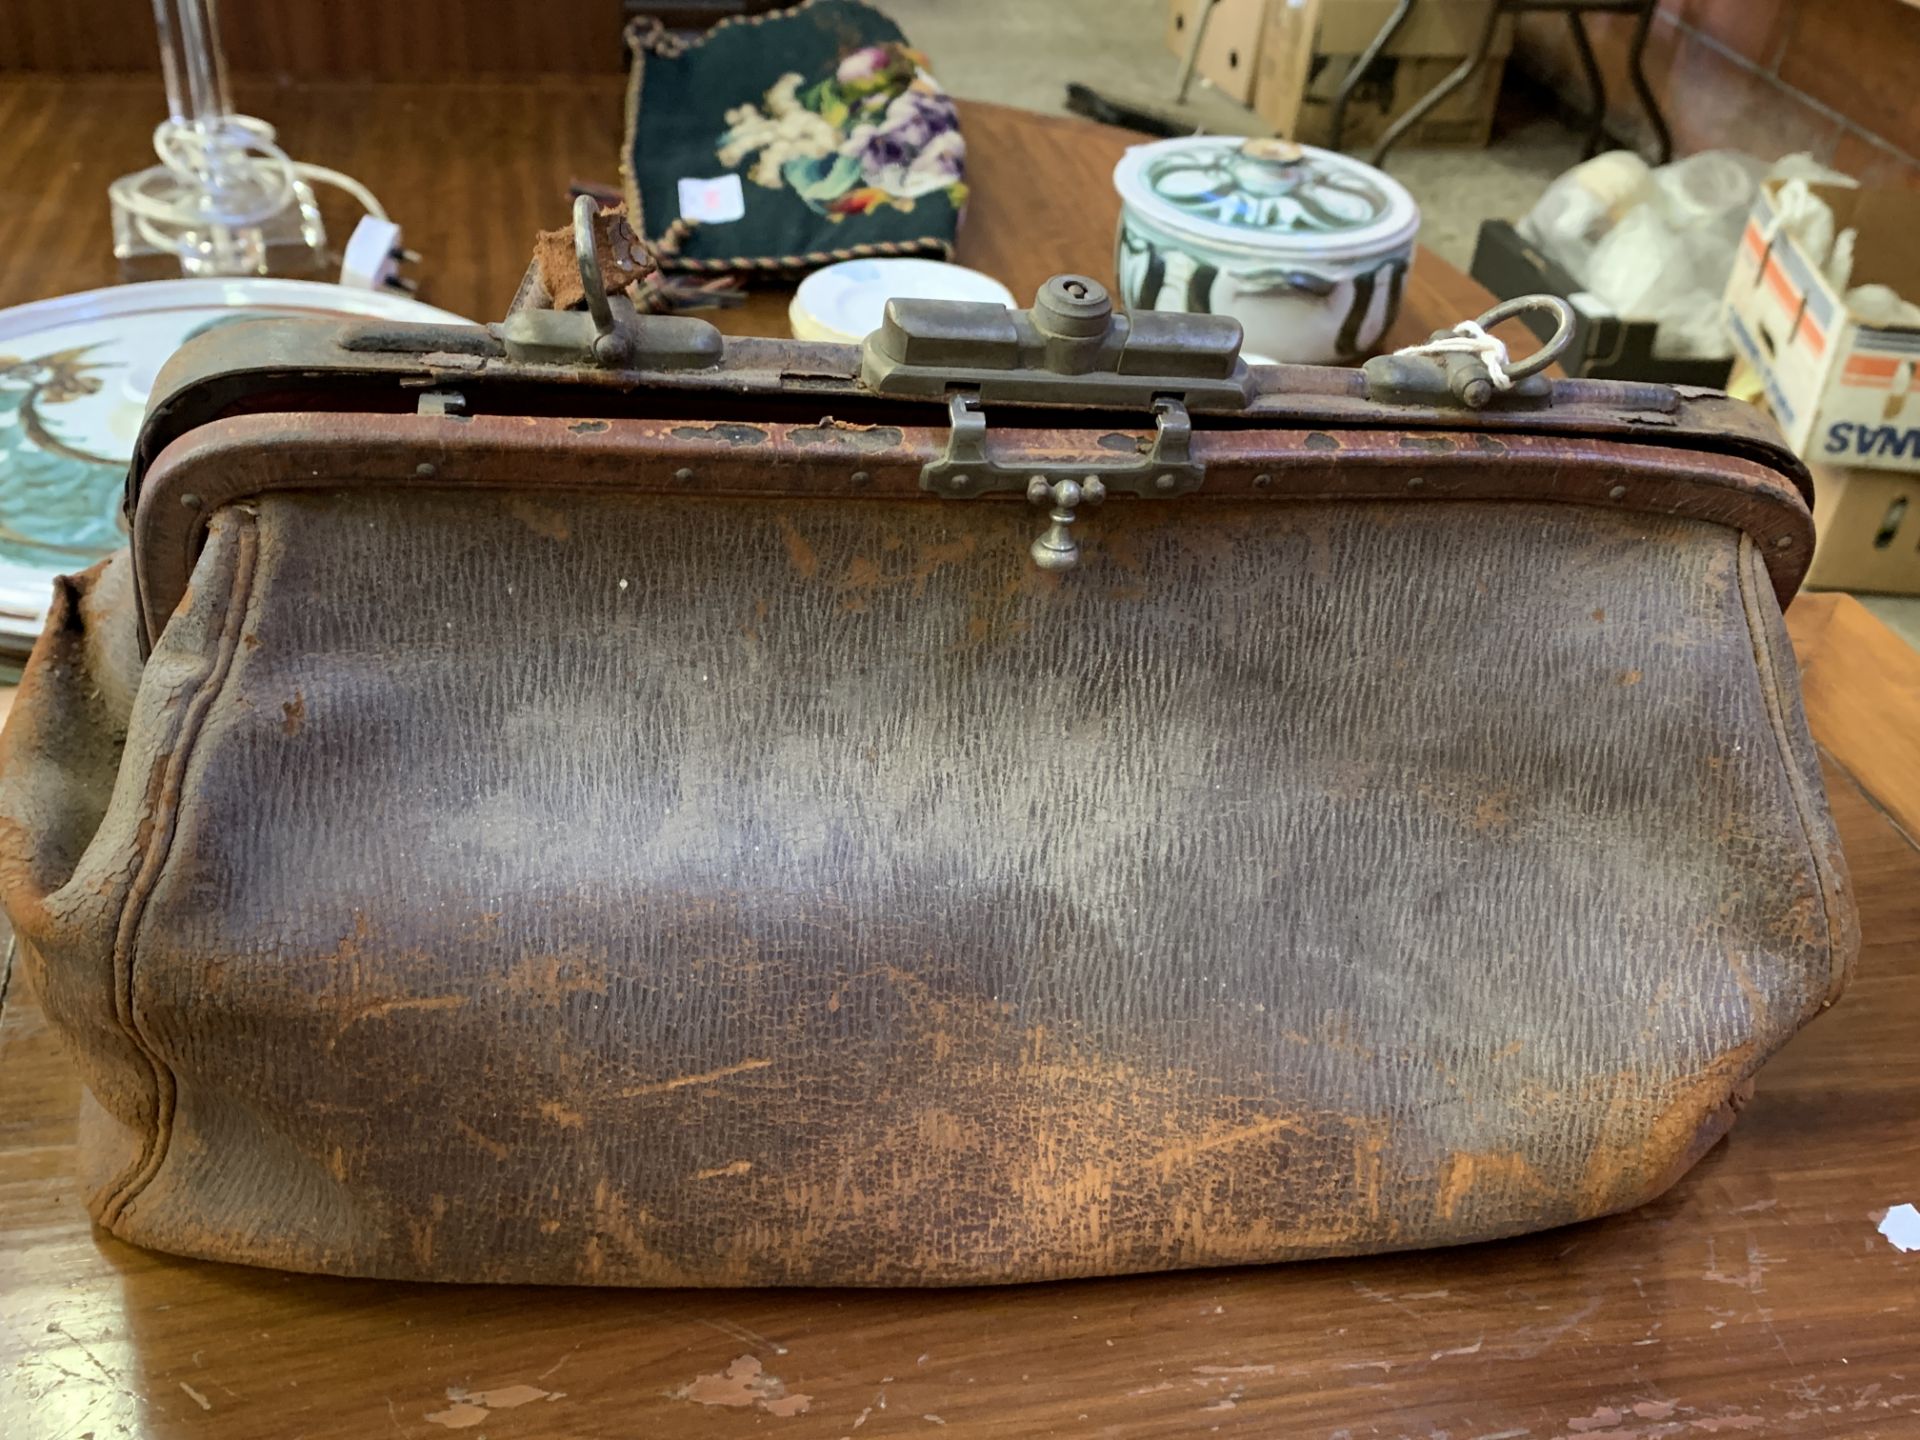 A small brown leather Gladstone bag containing antique dentists' tools, and a briefcase